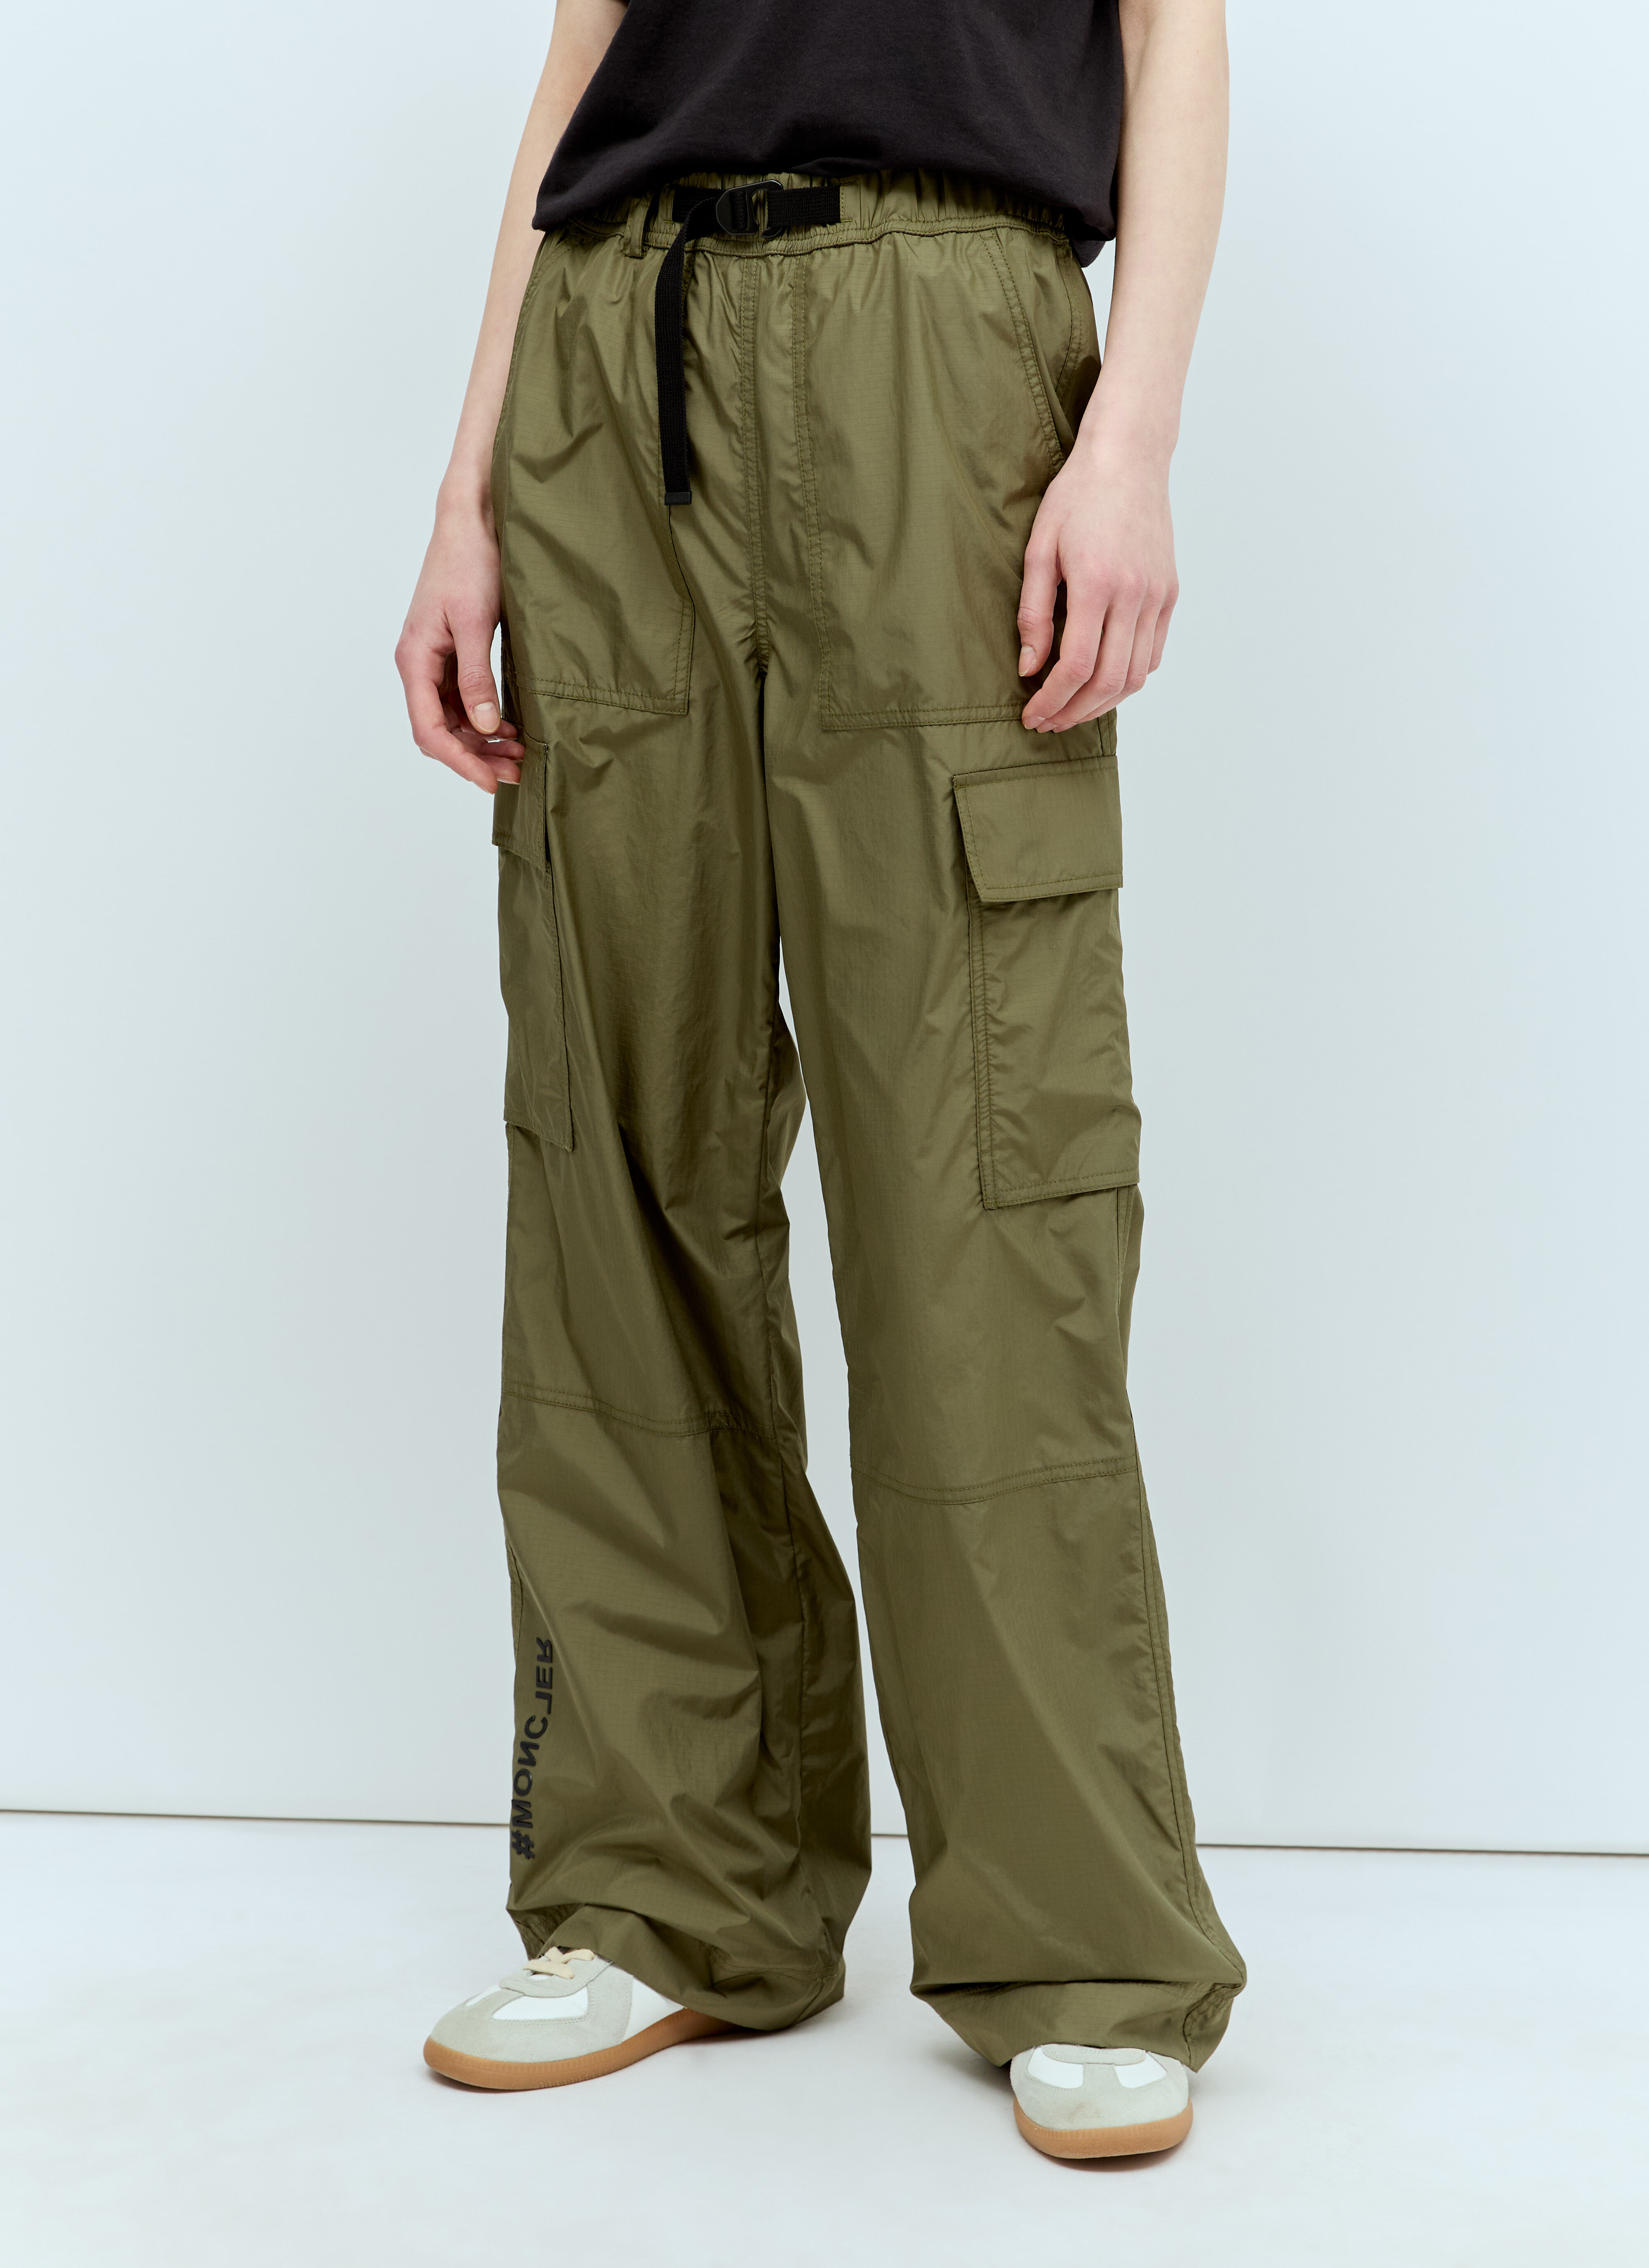 Space Available Ripstop Cargo Pants Black spa0354016